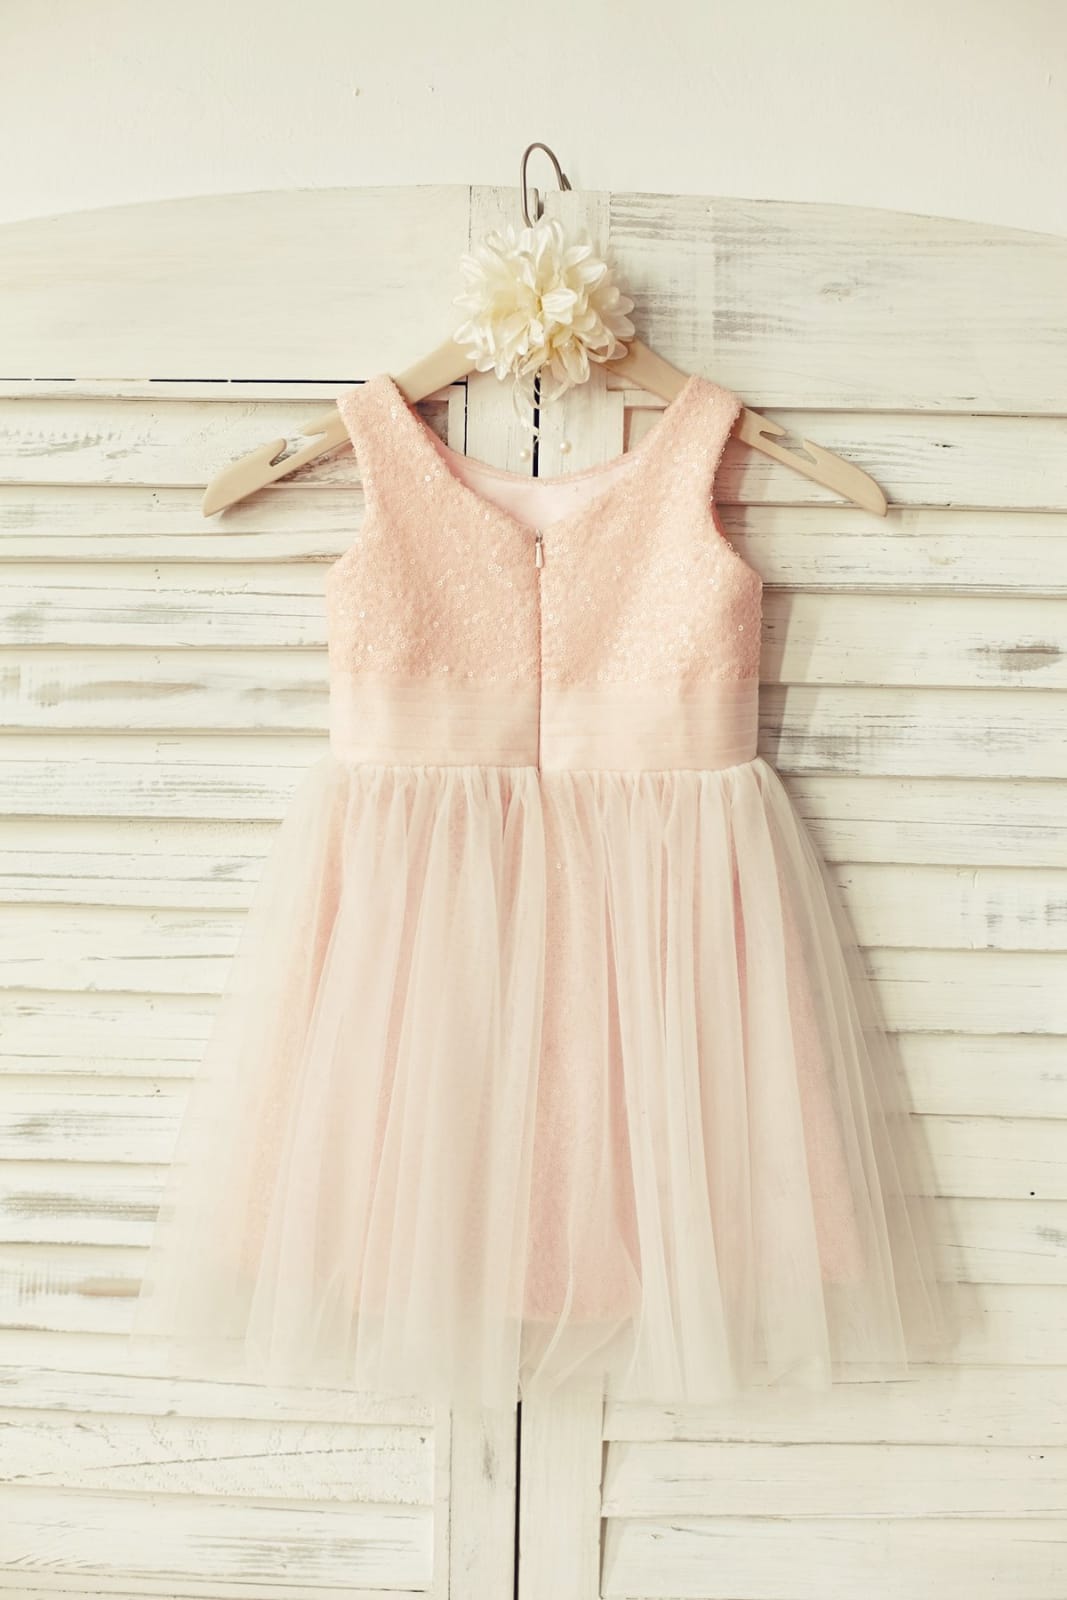 Peach/Champagne/Mint/Silver/Navy Sequin Tulle Flower Girl Dress